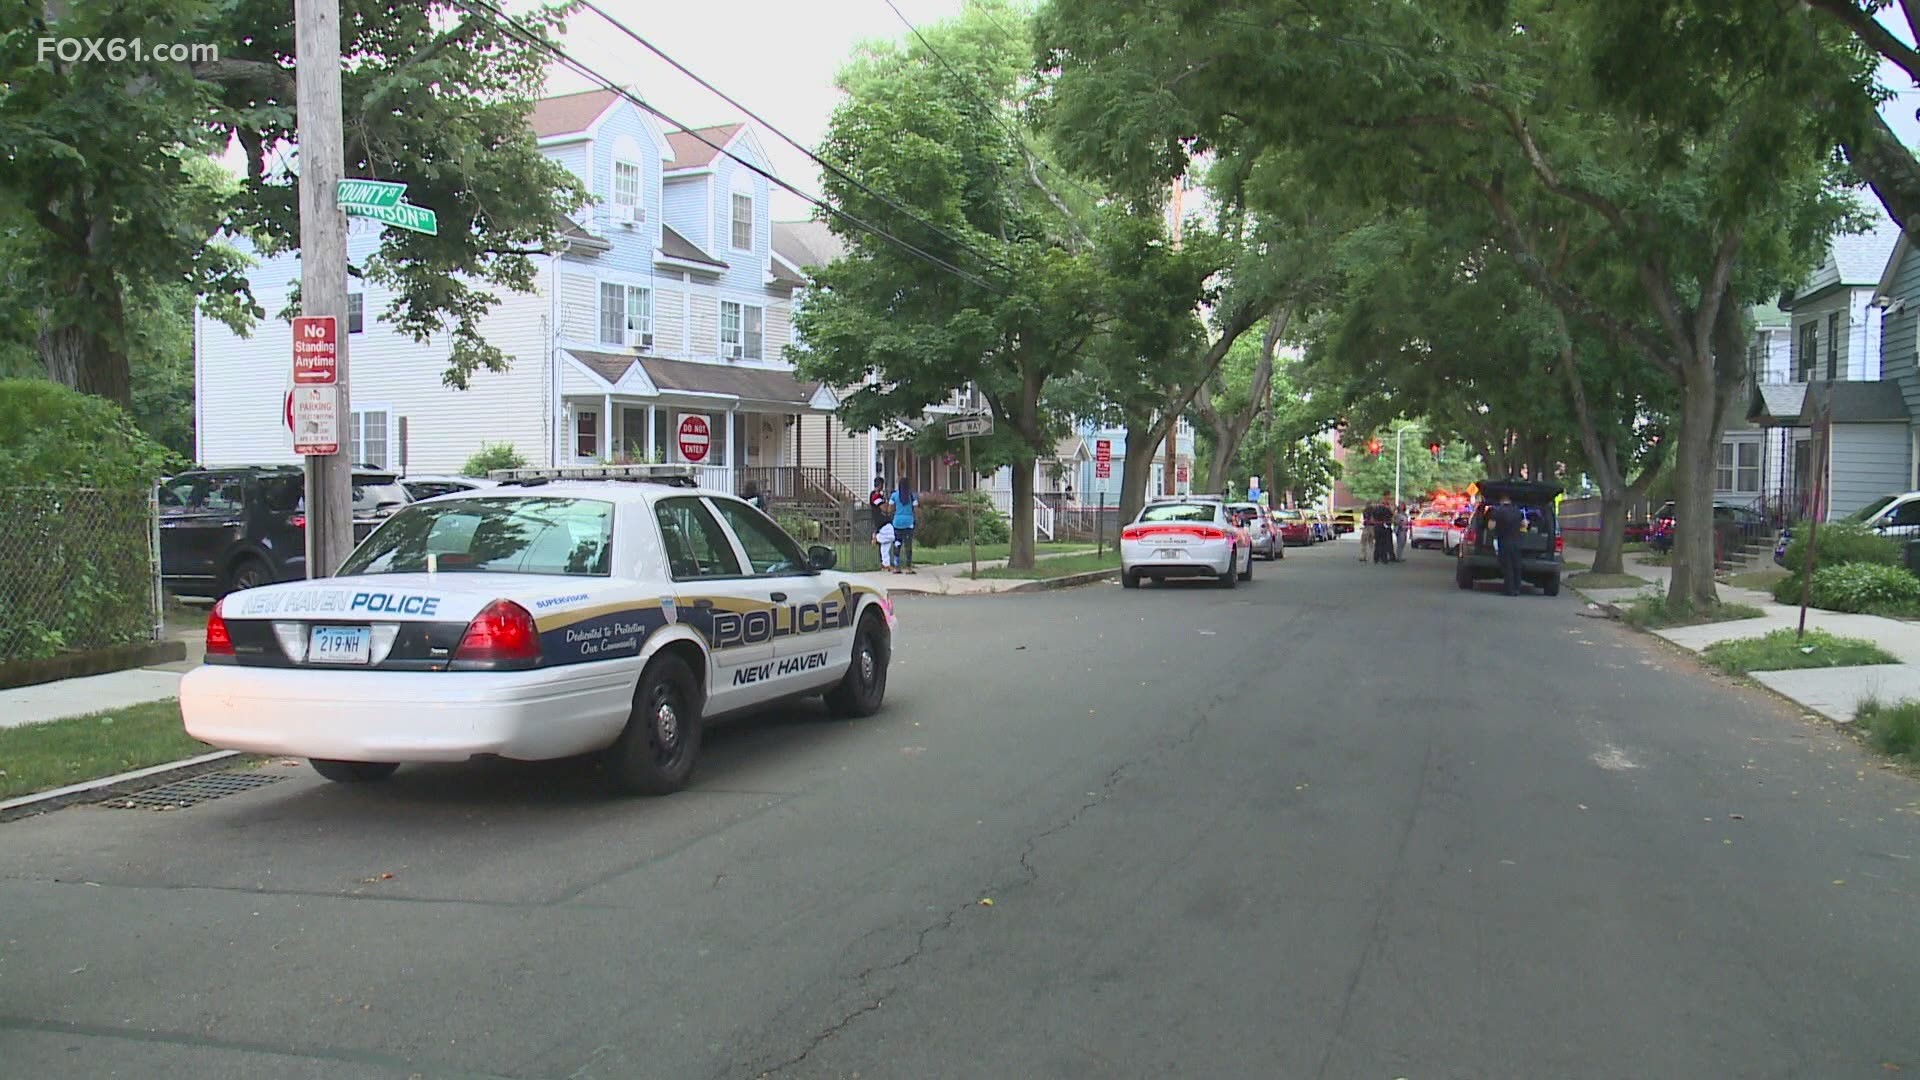 The victim was killed on Munson Street. The shooting was one of four separate shootings that day.